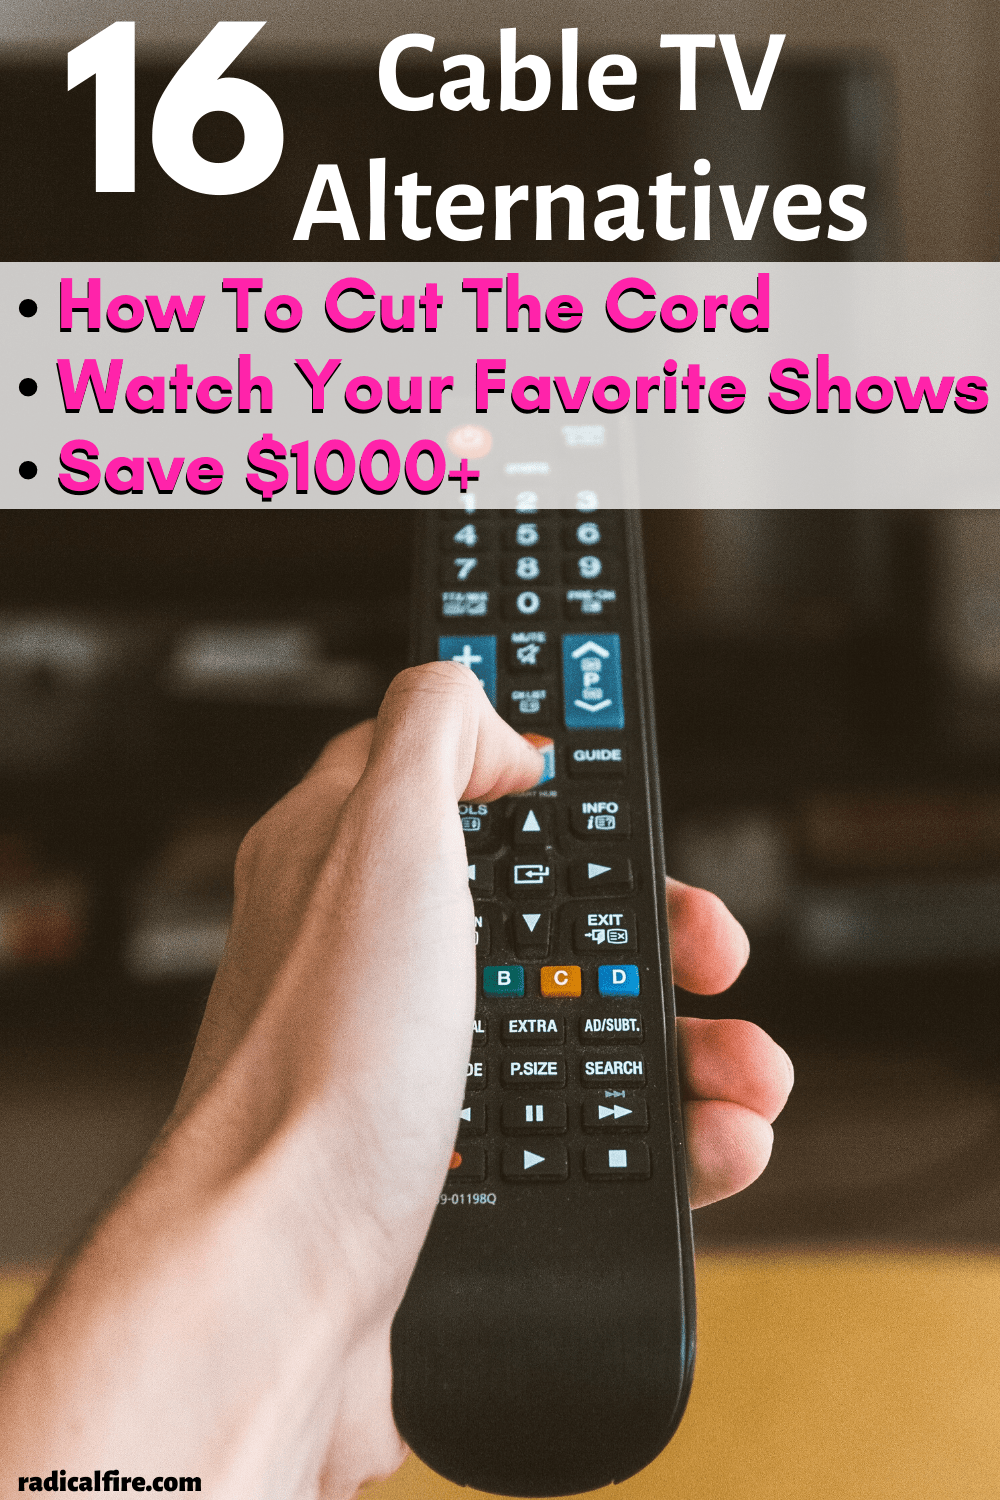 16 Cable TV Alternatives To Cut The Cord In 2020